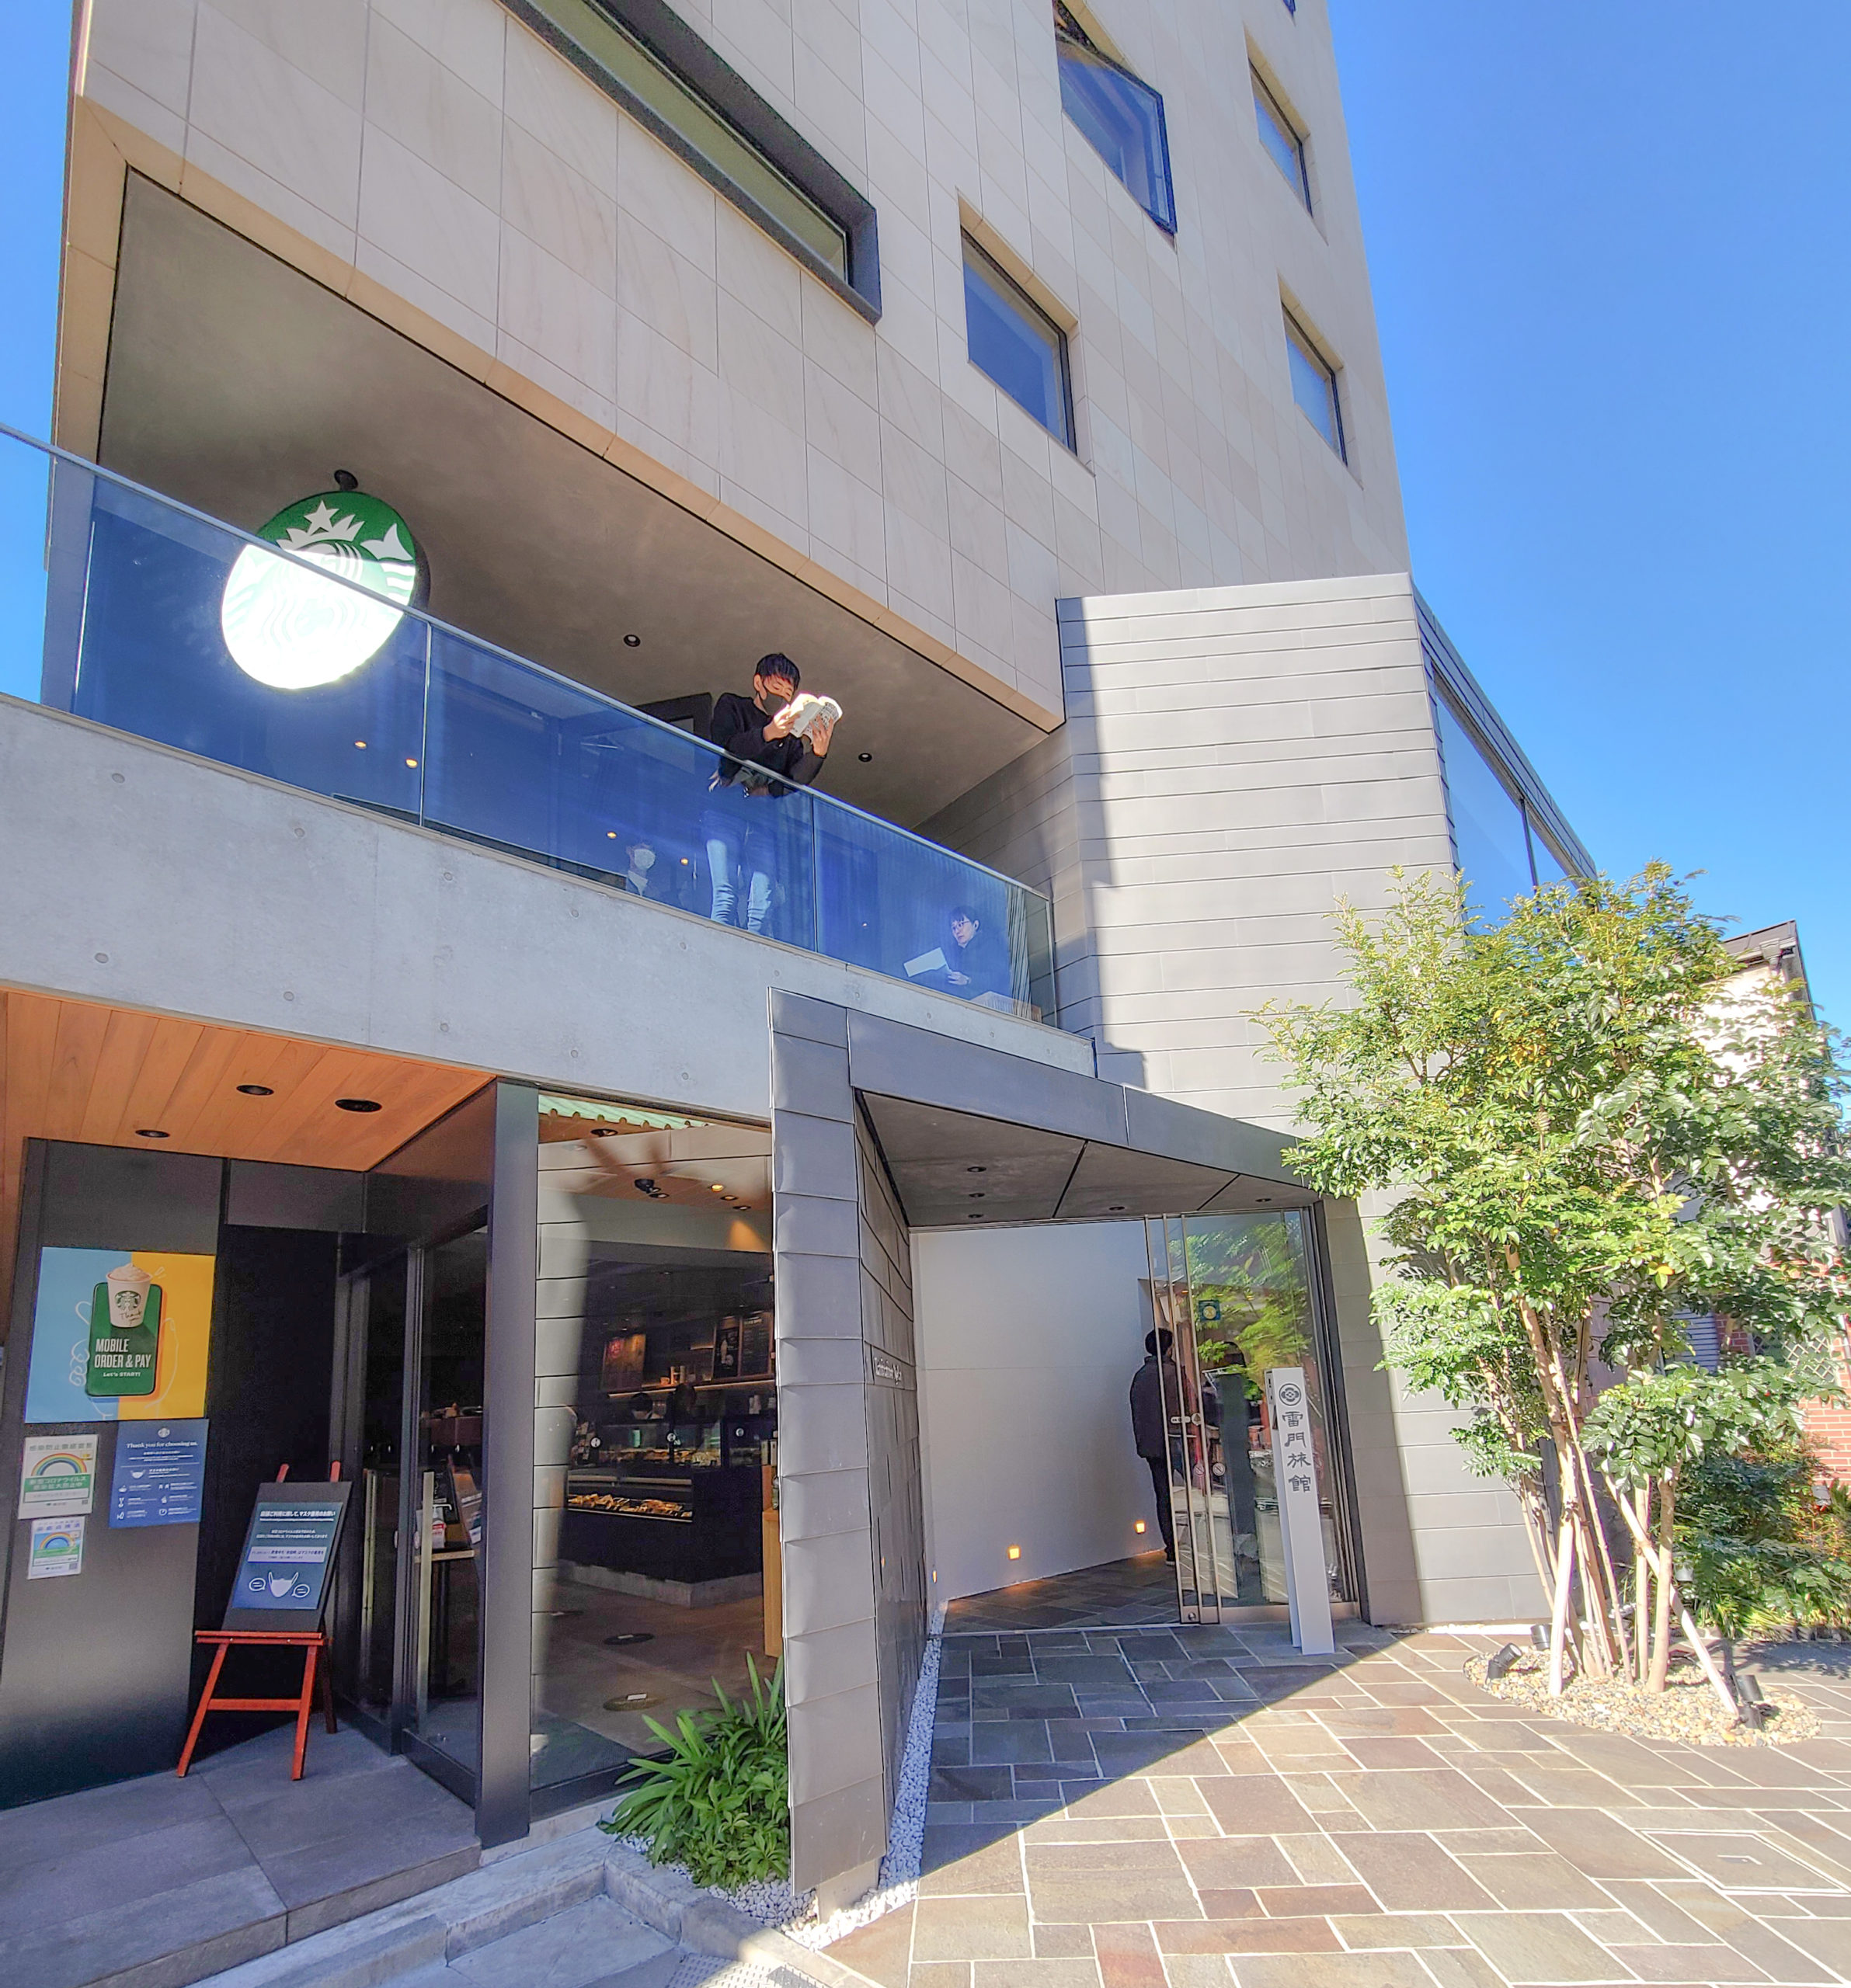 I walk past the Starbucks that is adjacent to ryokan’s entrance, into the modern and chic-looking building. 